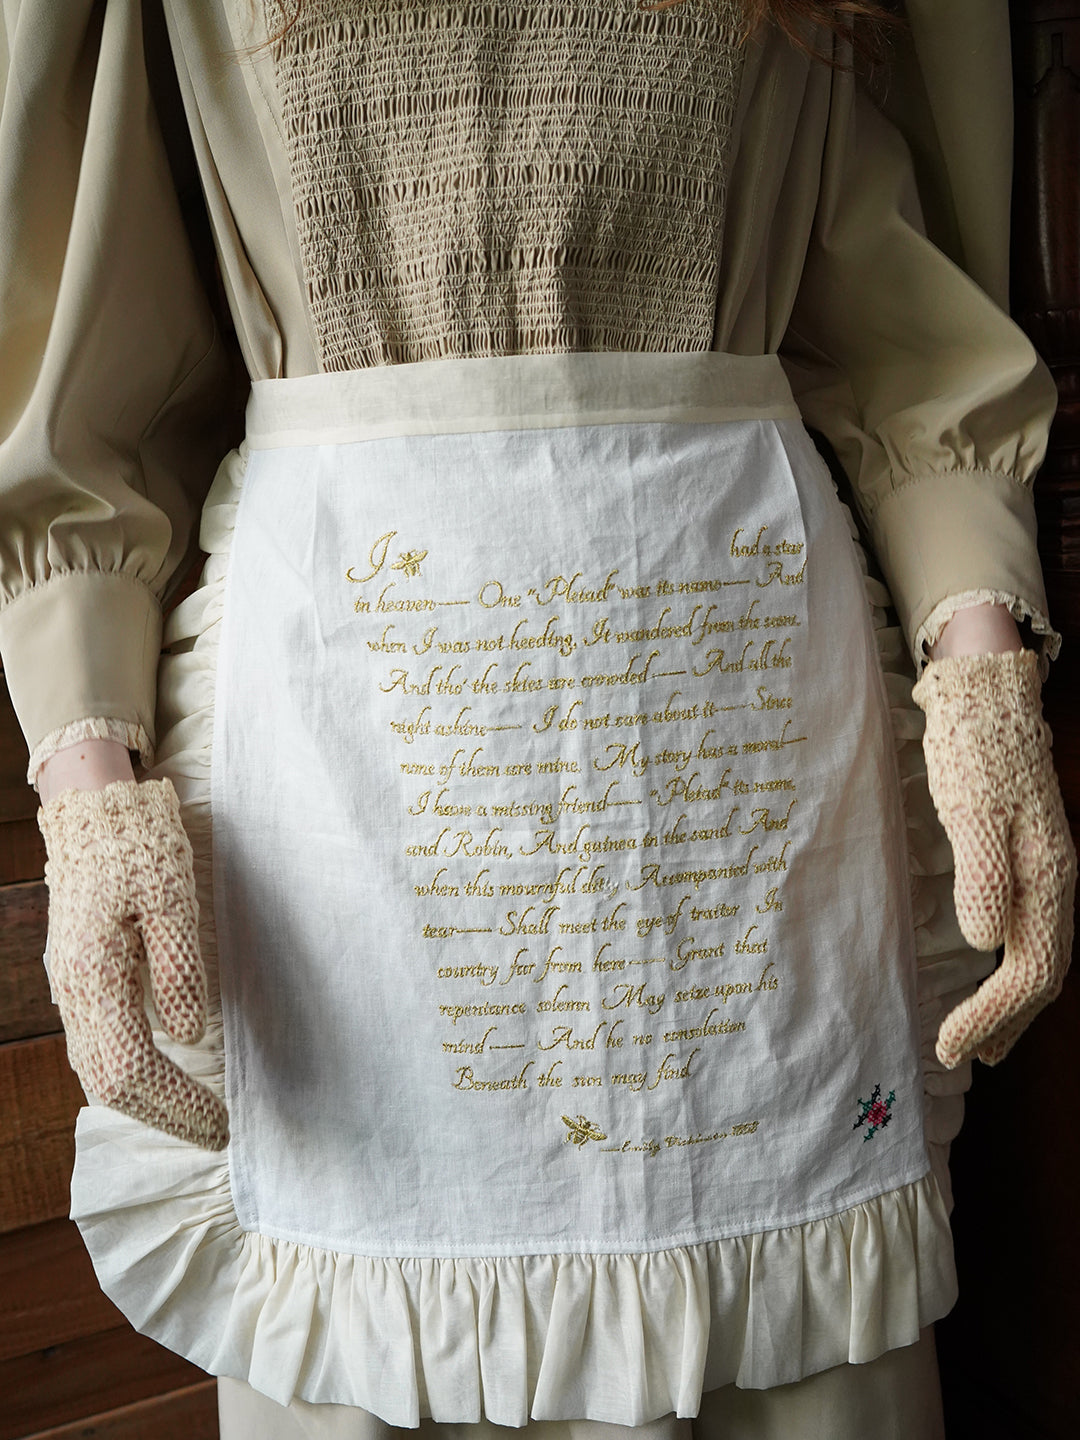 Unlogical Poem Poetry-embroidered Cotton Short Apron